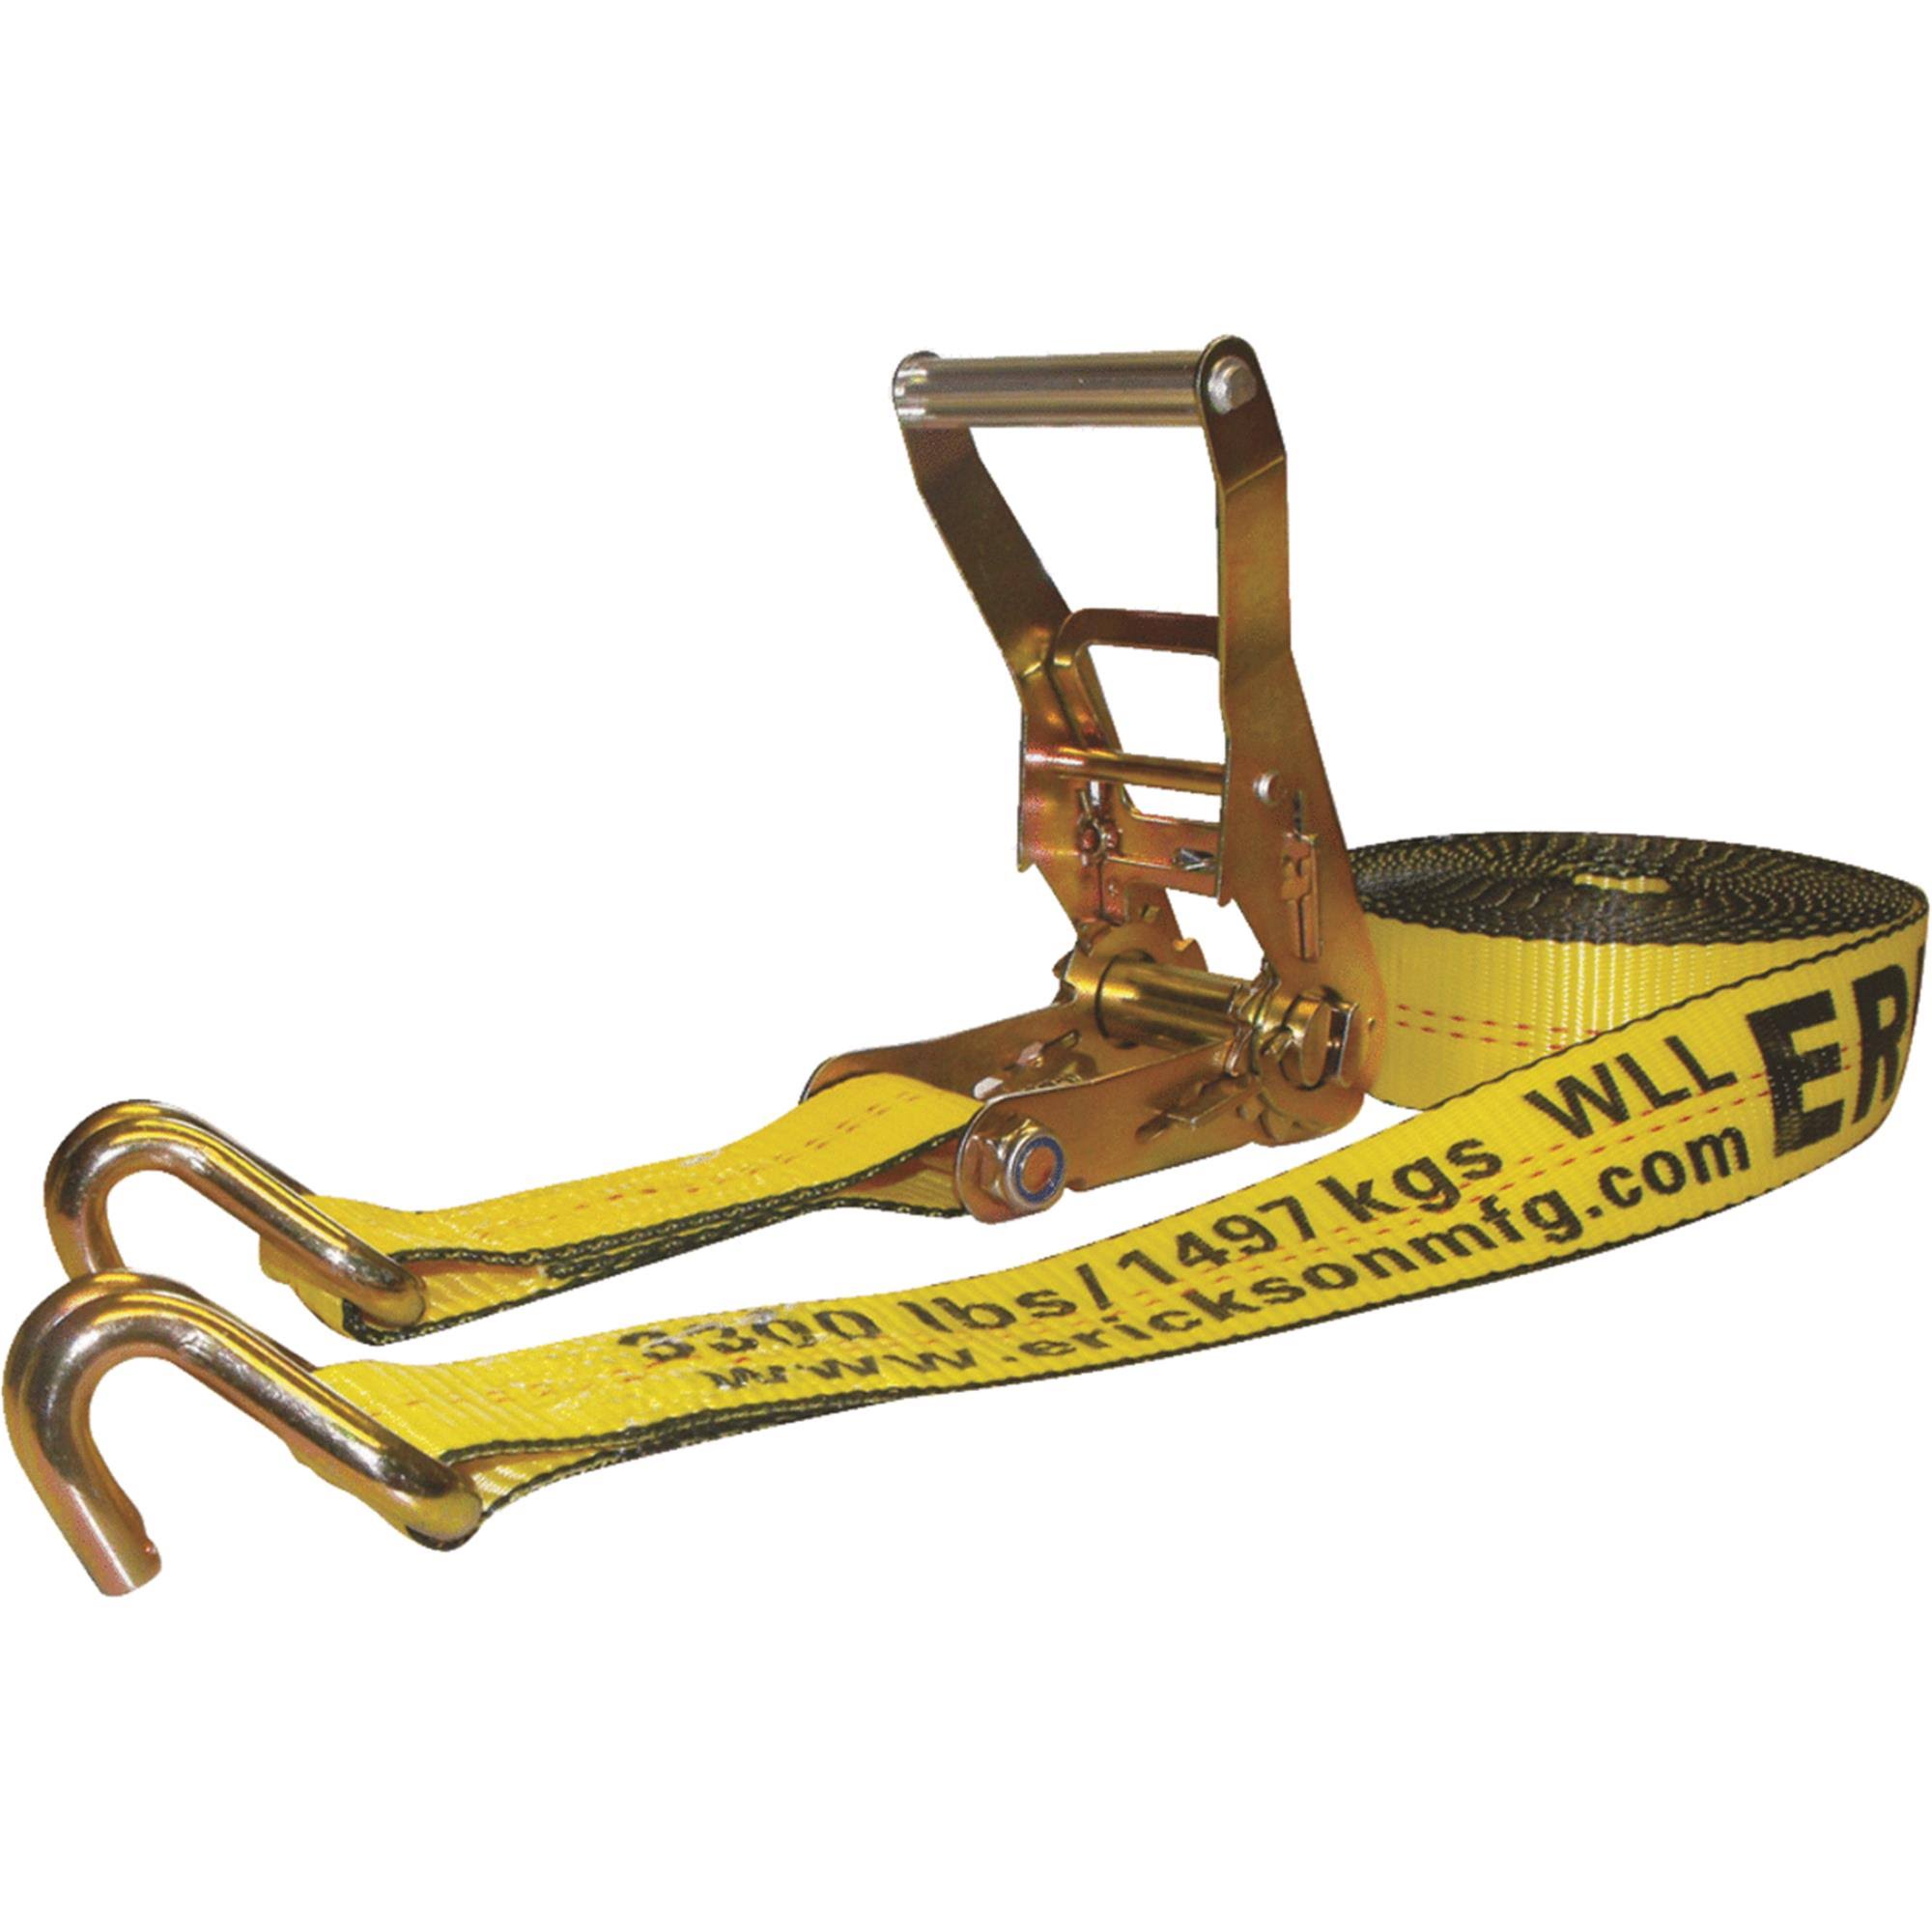 Erickson 78627 Ratcheting Tie-Down Strap - with Double J-Hooks, 2" x 27' 10,000lbs Load Limit